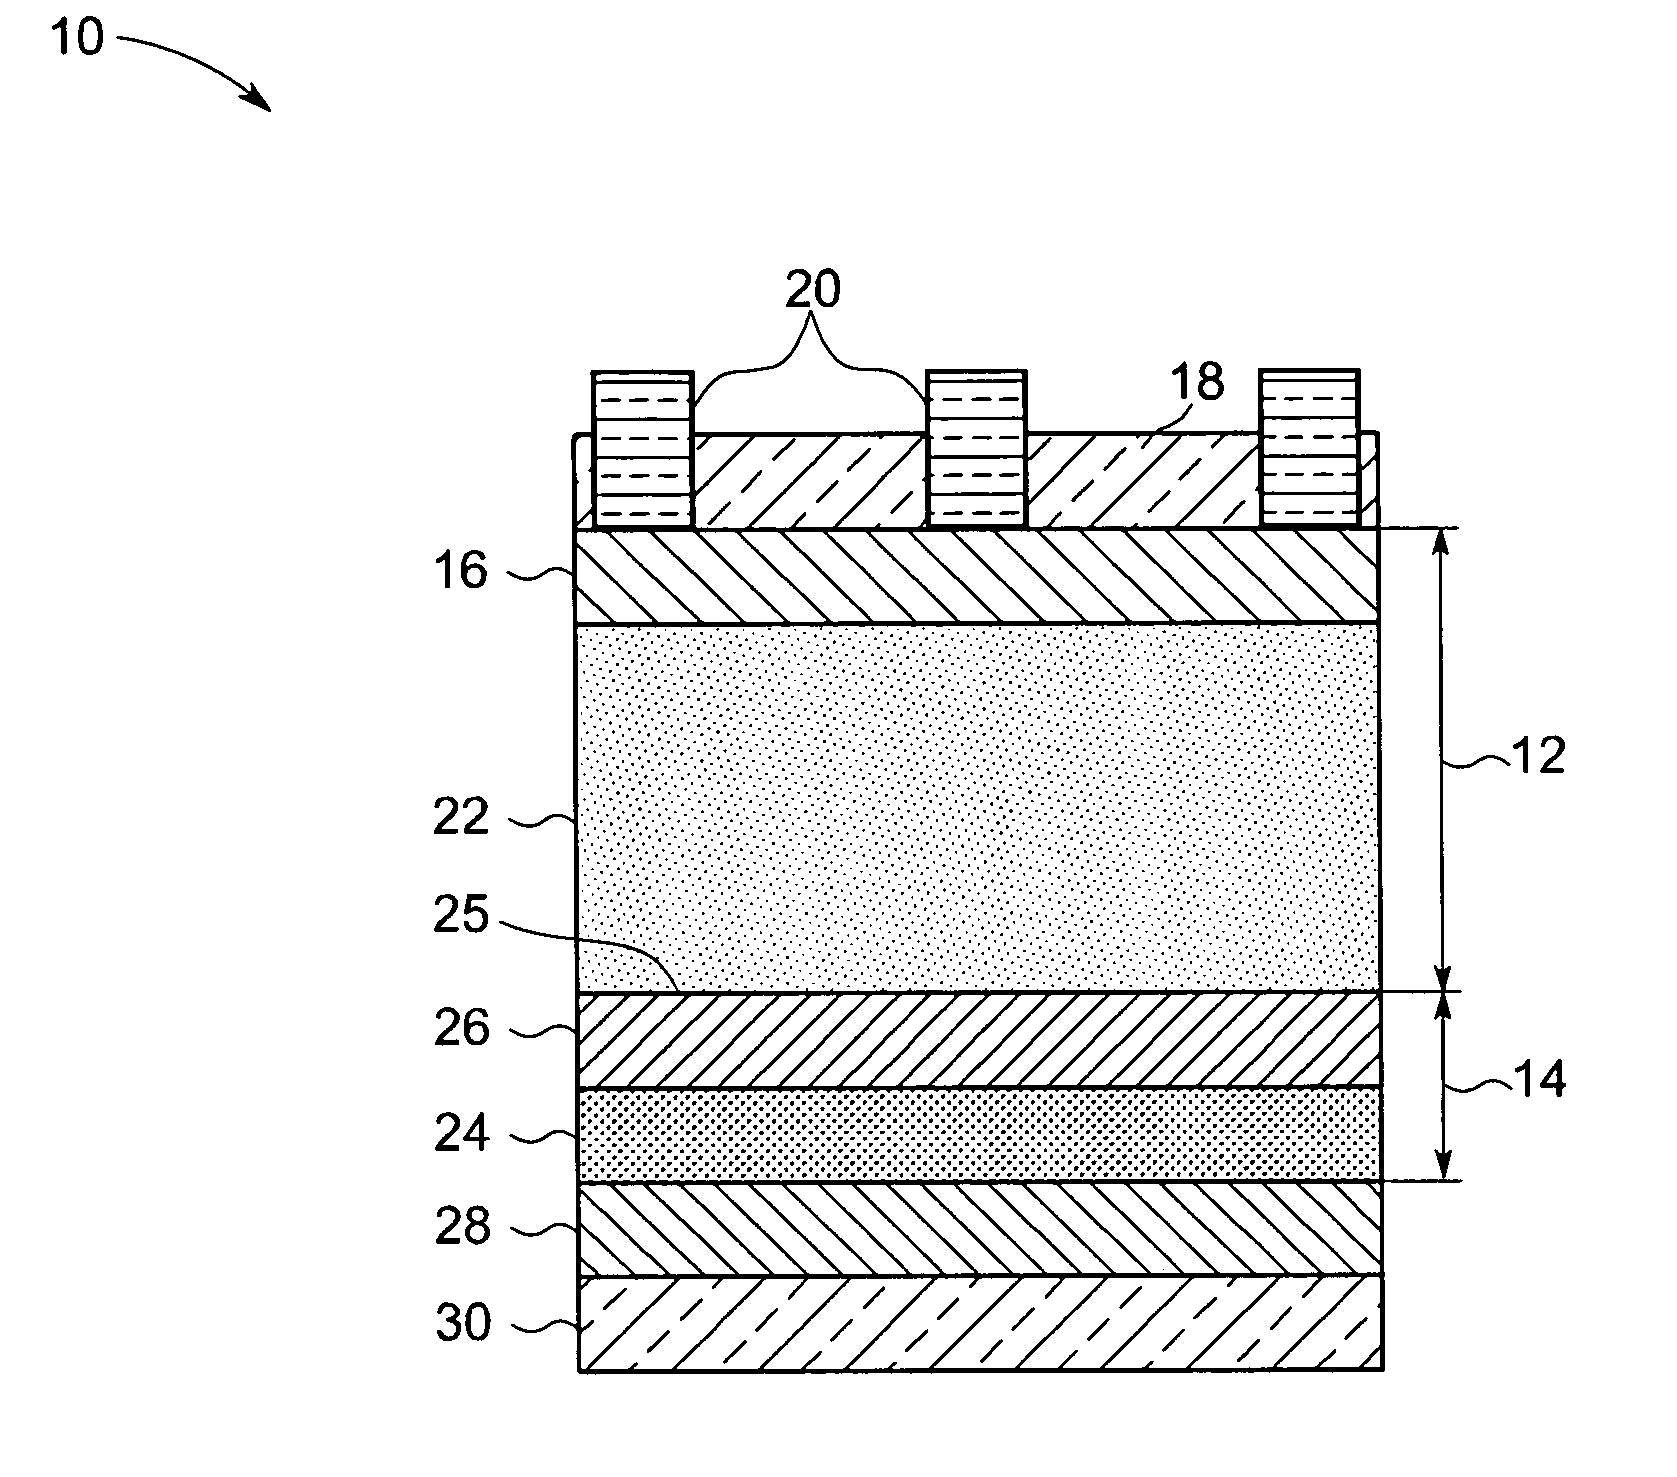 Surface passivated photovoltaic devices